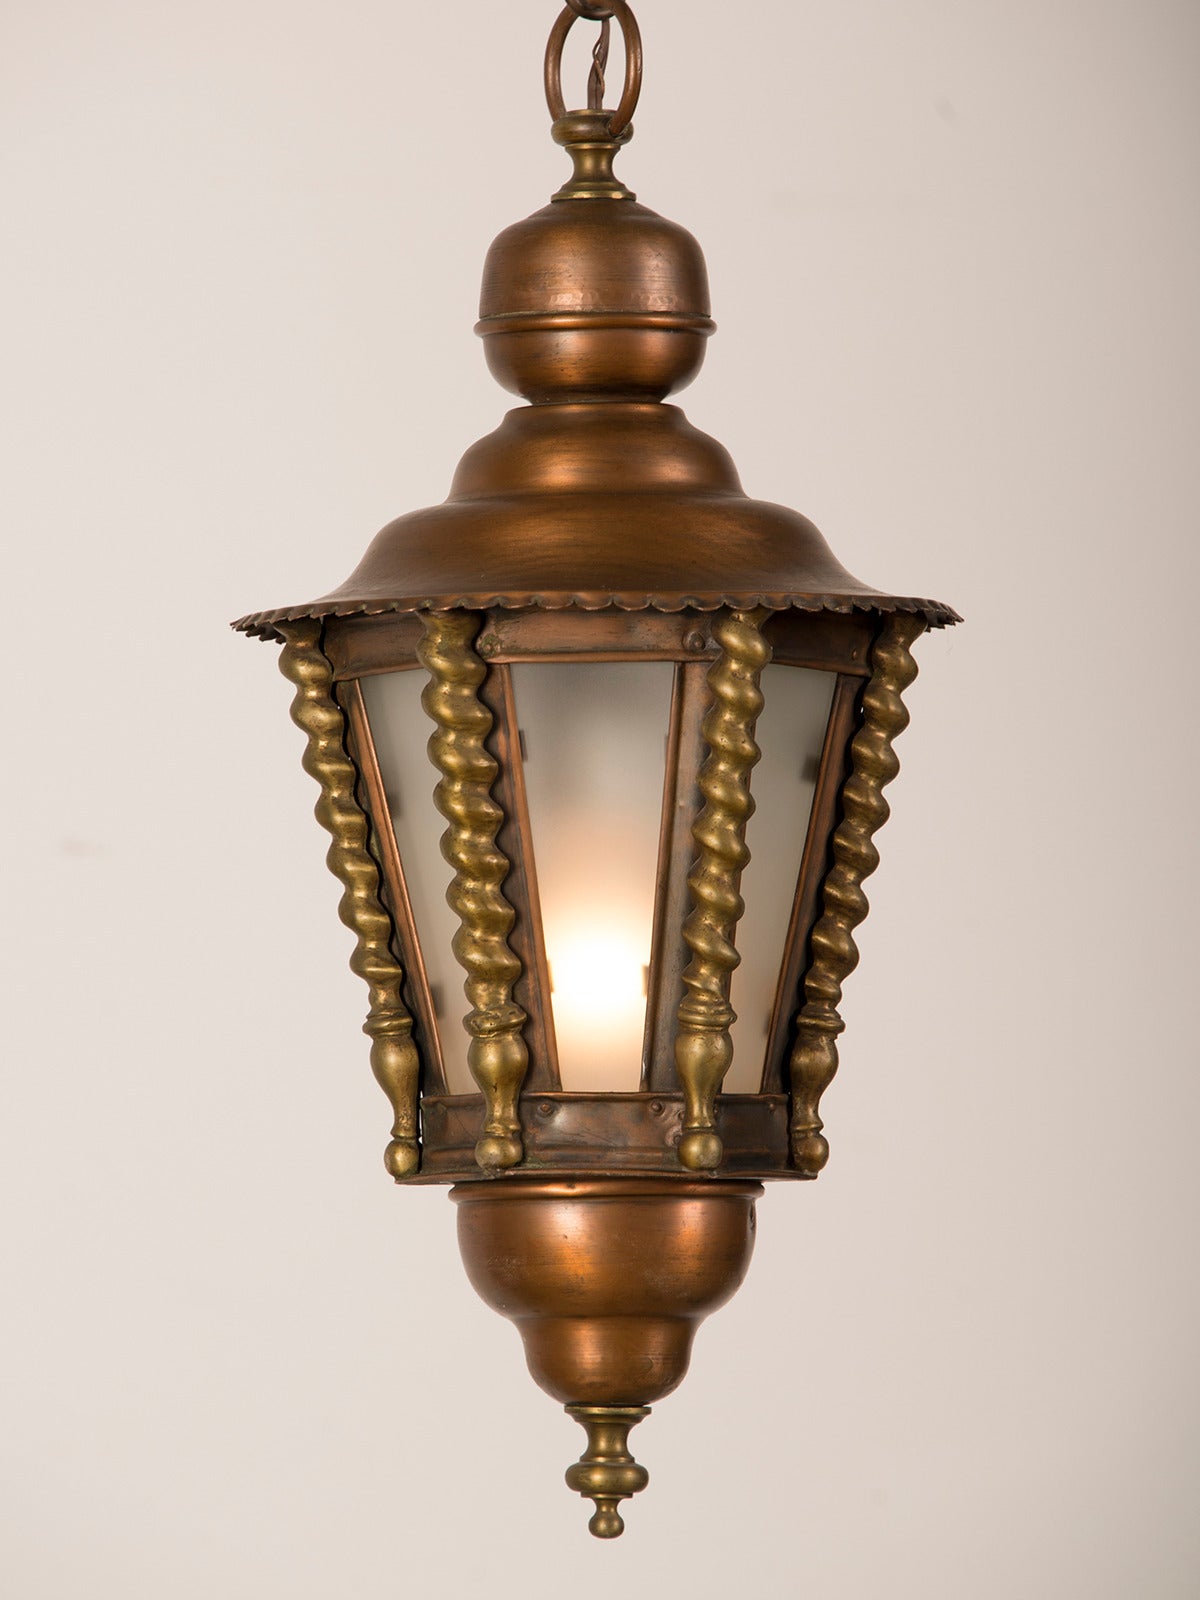 A charming brass and copper hall lantern from France c. 1920 having panes of frosted glass.